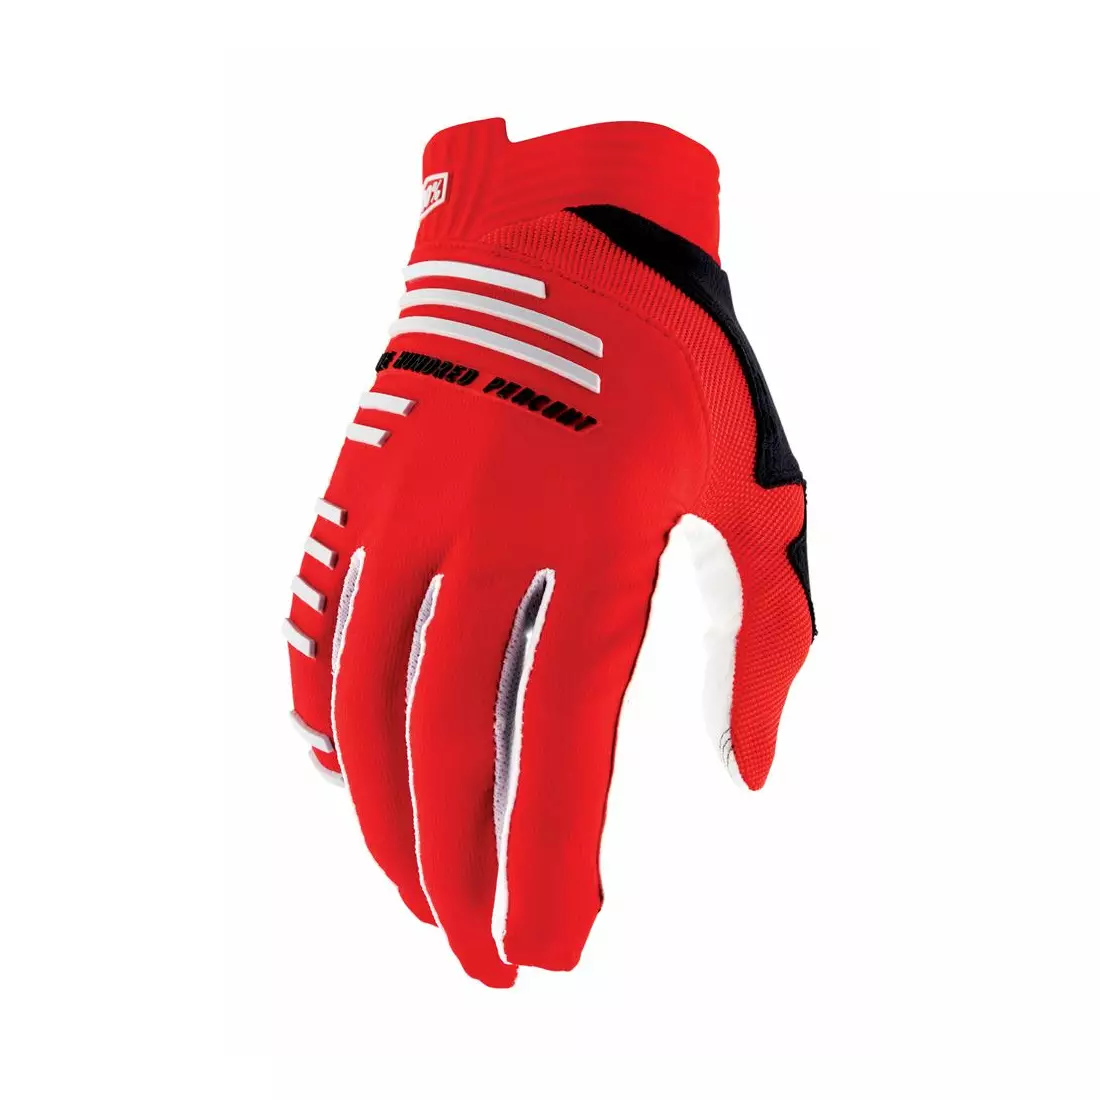 100% R-CORE men's cycling gloves, red